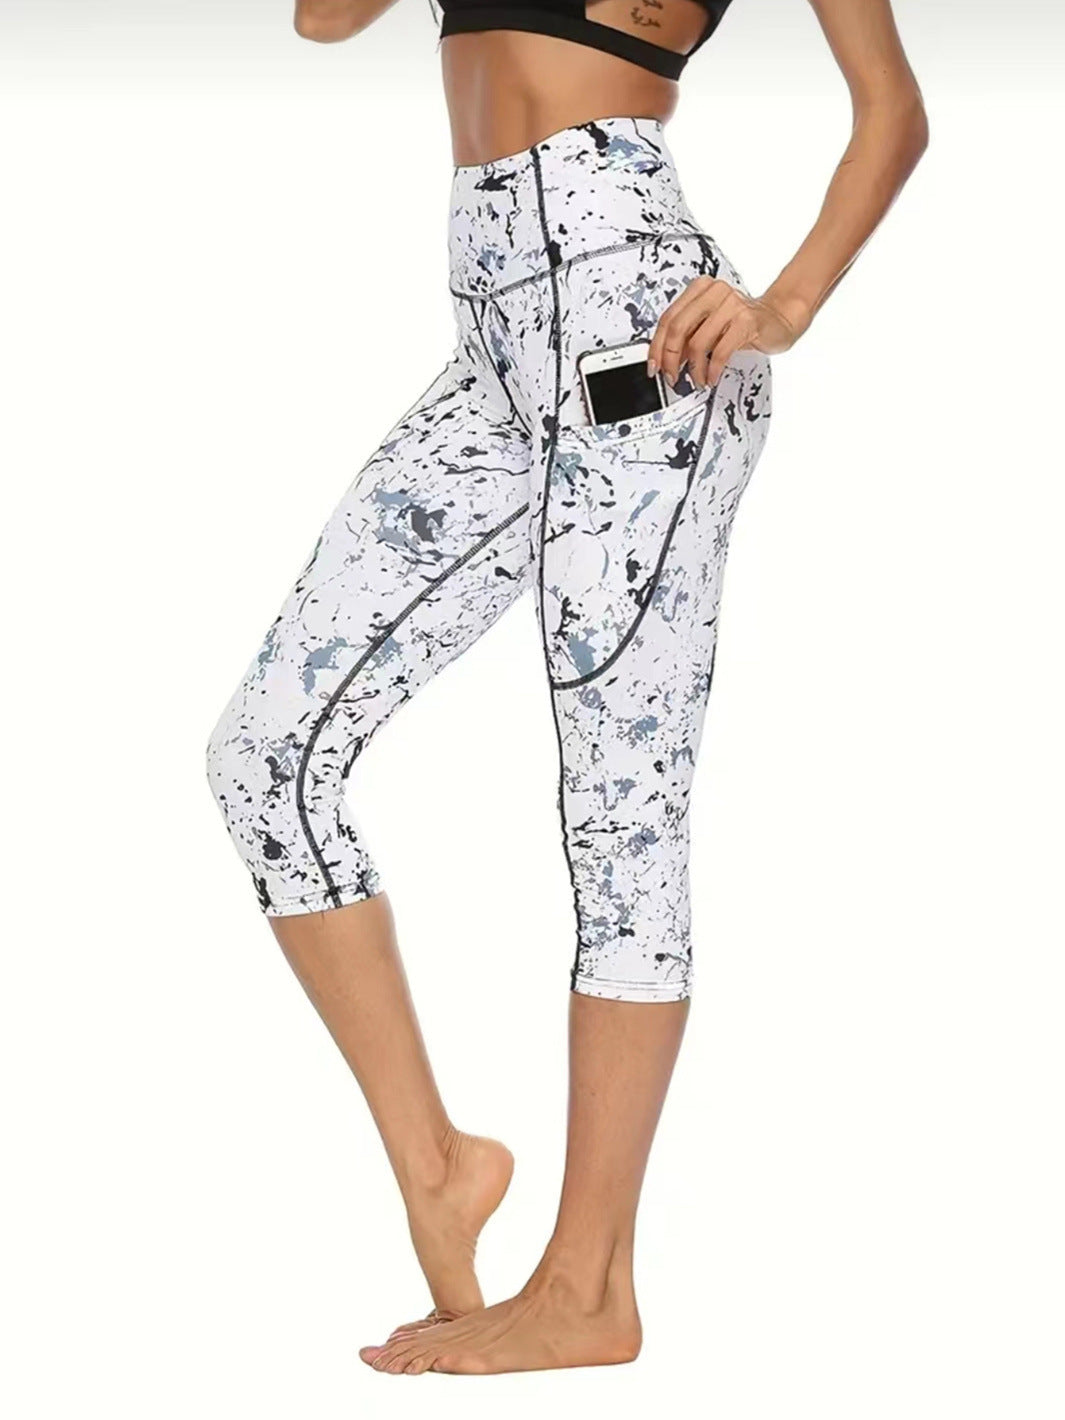 Trousers Belly Contracting Hip Lifting Yoga Fitness Exercise Nude Feel Tight Leggings Printing